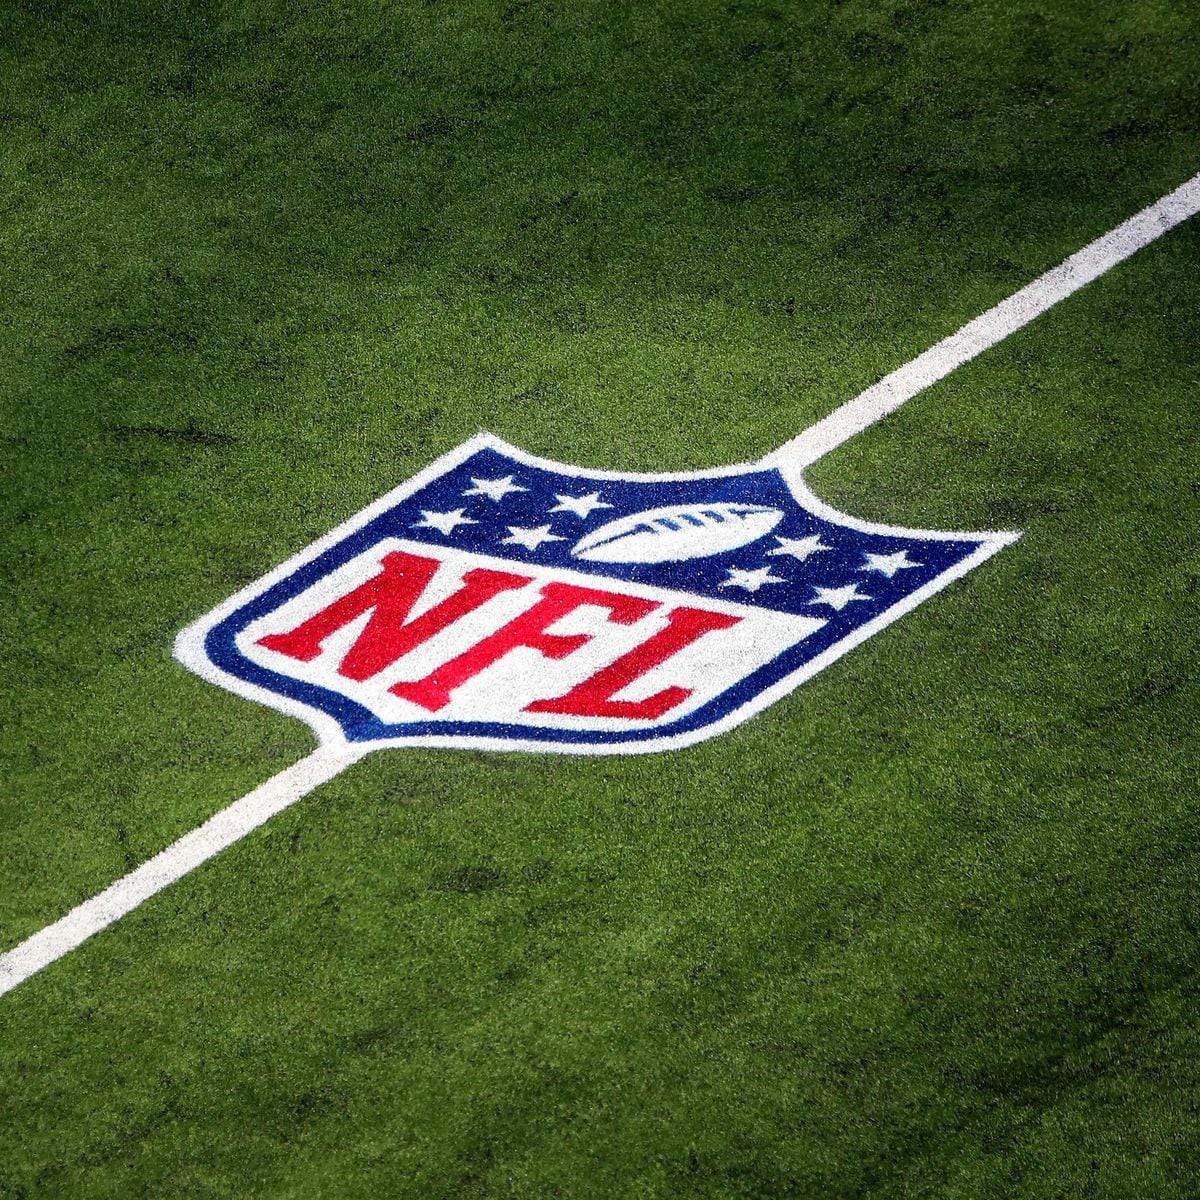 NFL announces international schedule: 3 London games, MNF in Mexico City,  1st game in Germany